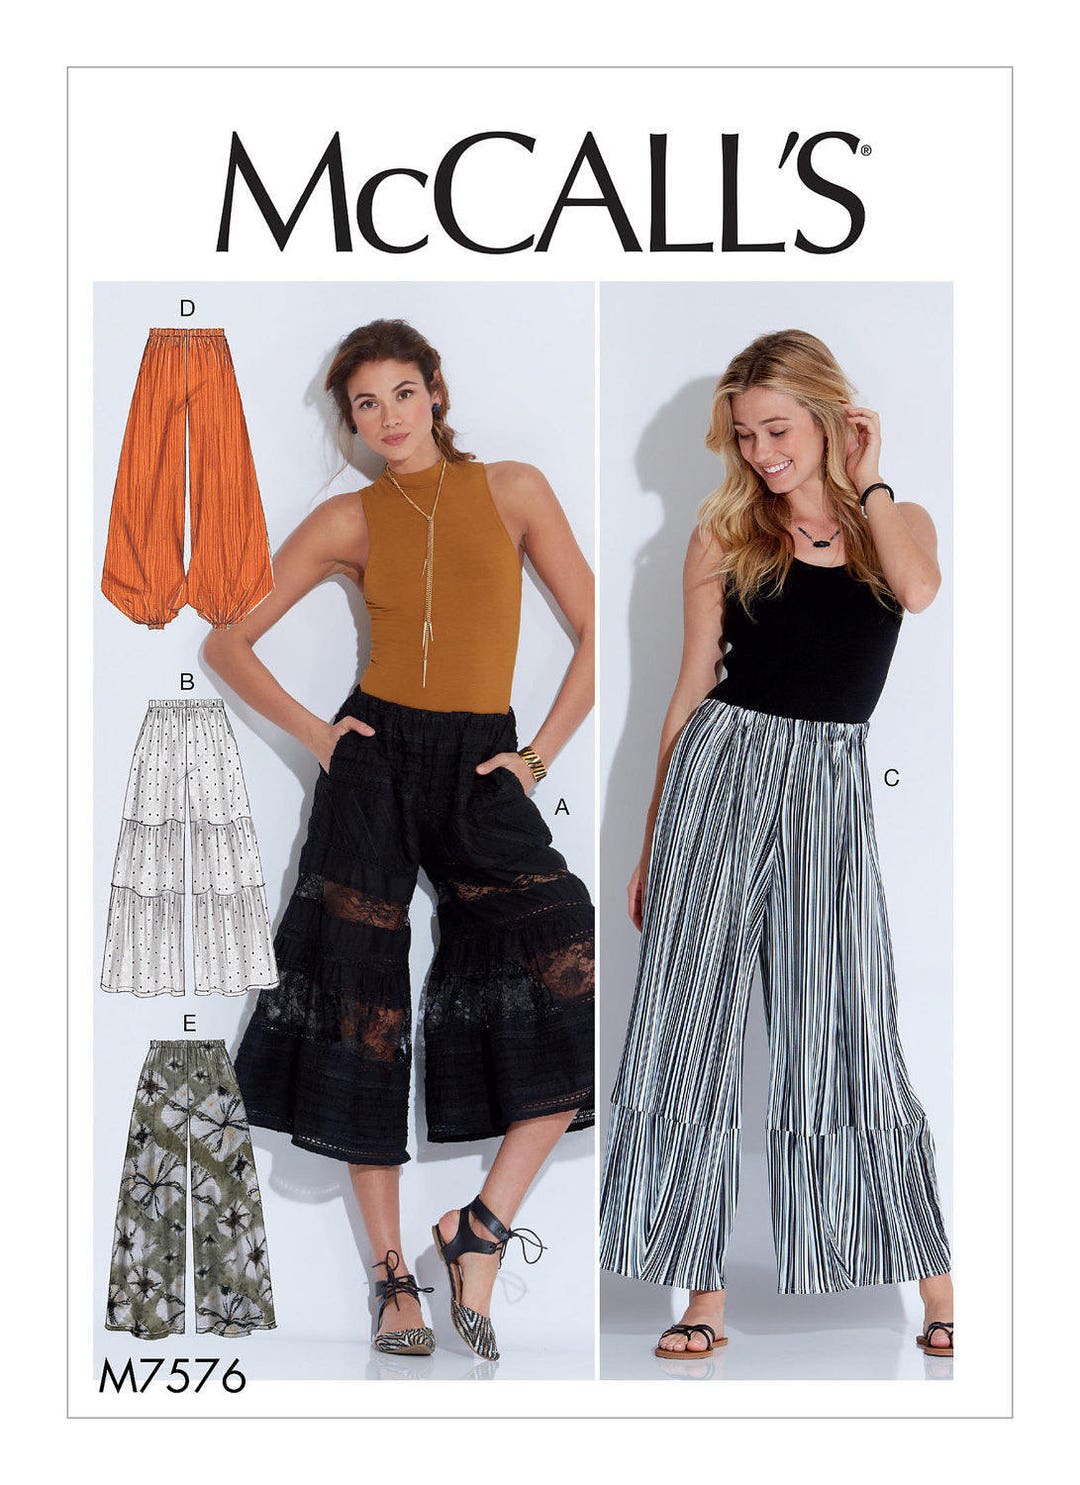 Mccall's Sewing Pattern M7576 Misses' Elastic-waist - Etsy